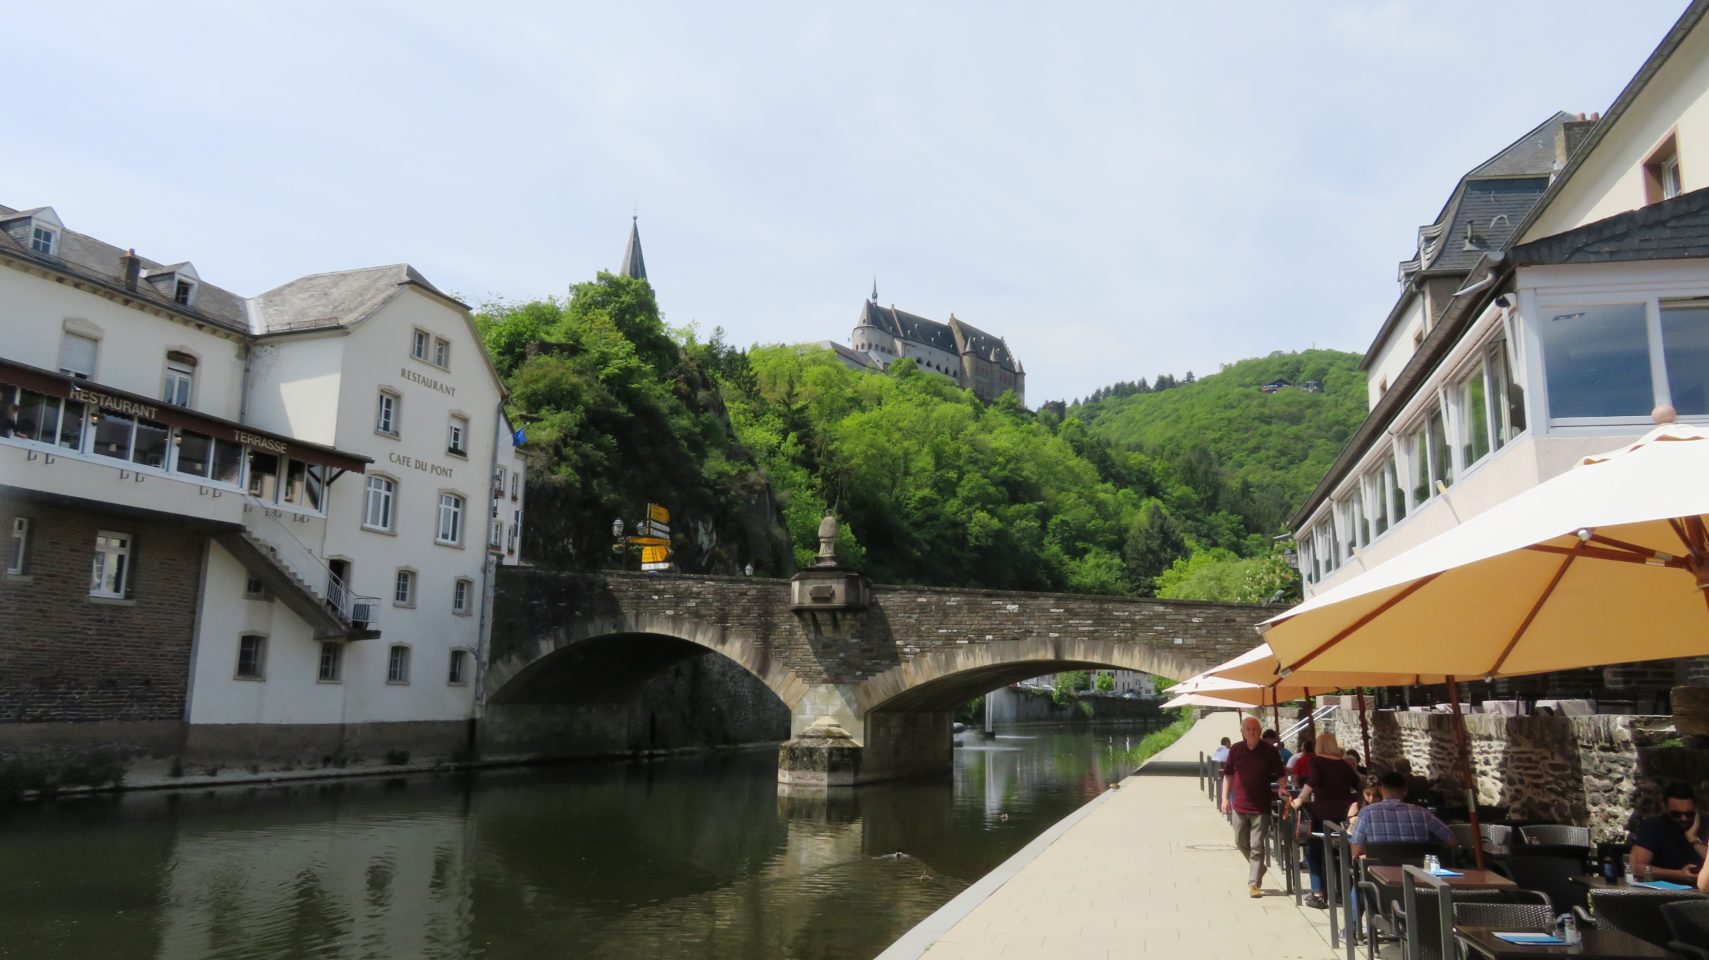 Auberge de l'Our and Our River in Vianden, <em><strong>Luxembourg</strong></em>